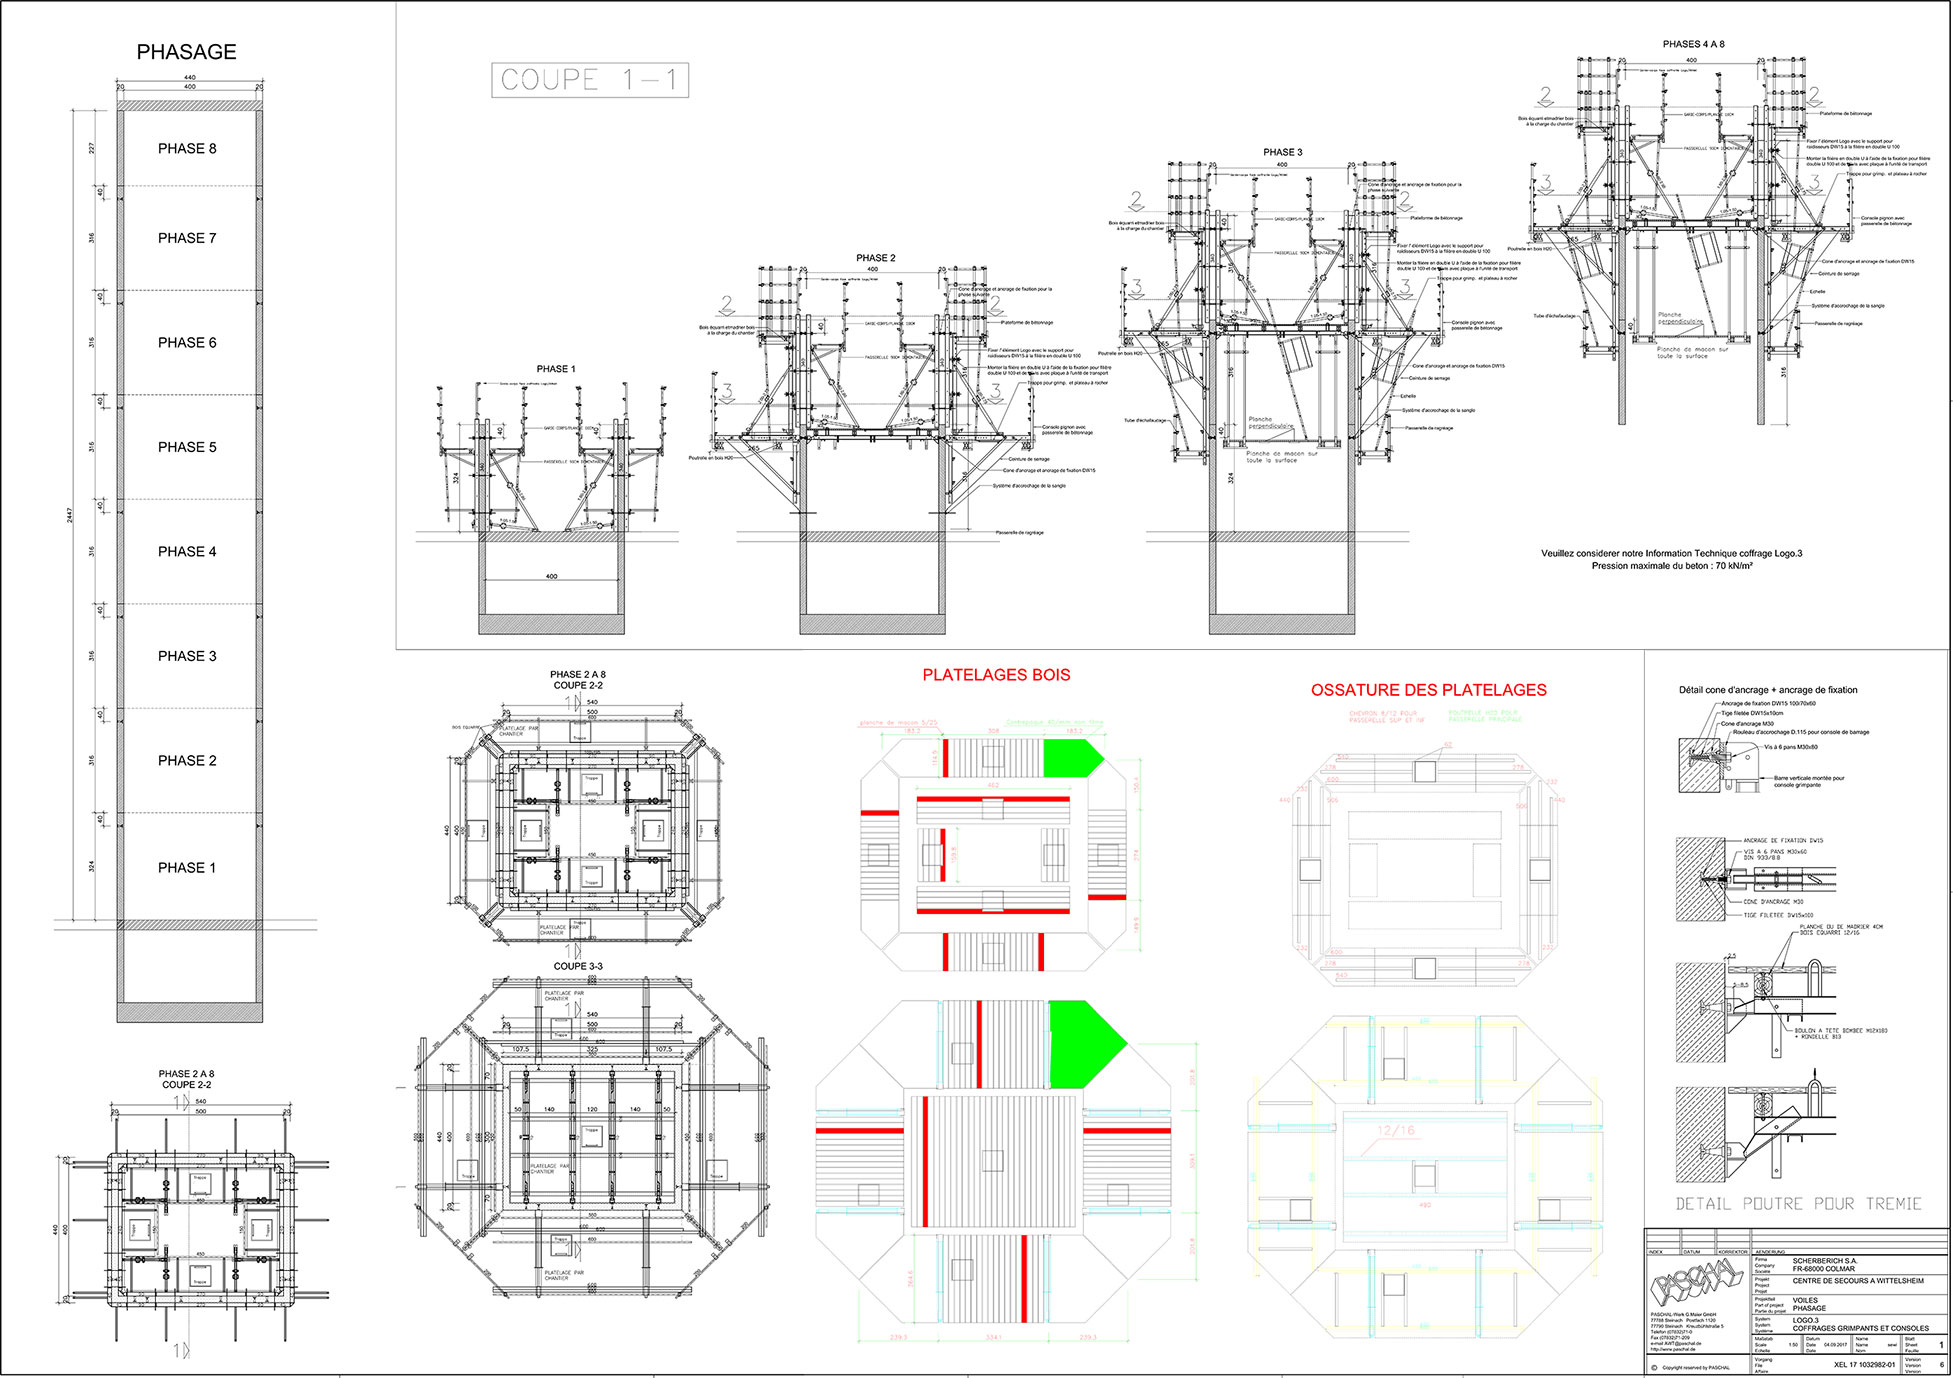 Detailed formwork planning with PASCHAL-Plan pro